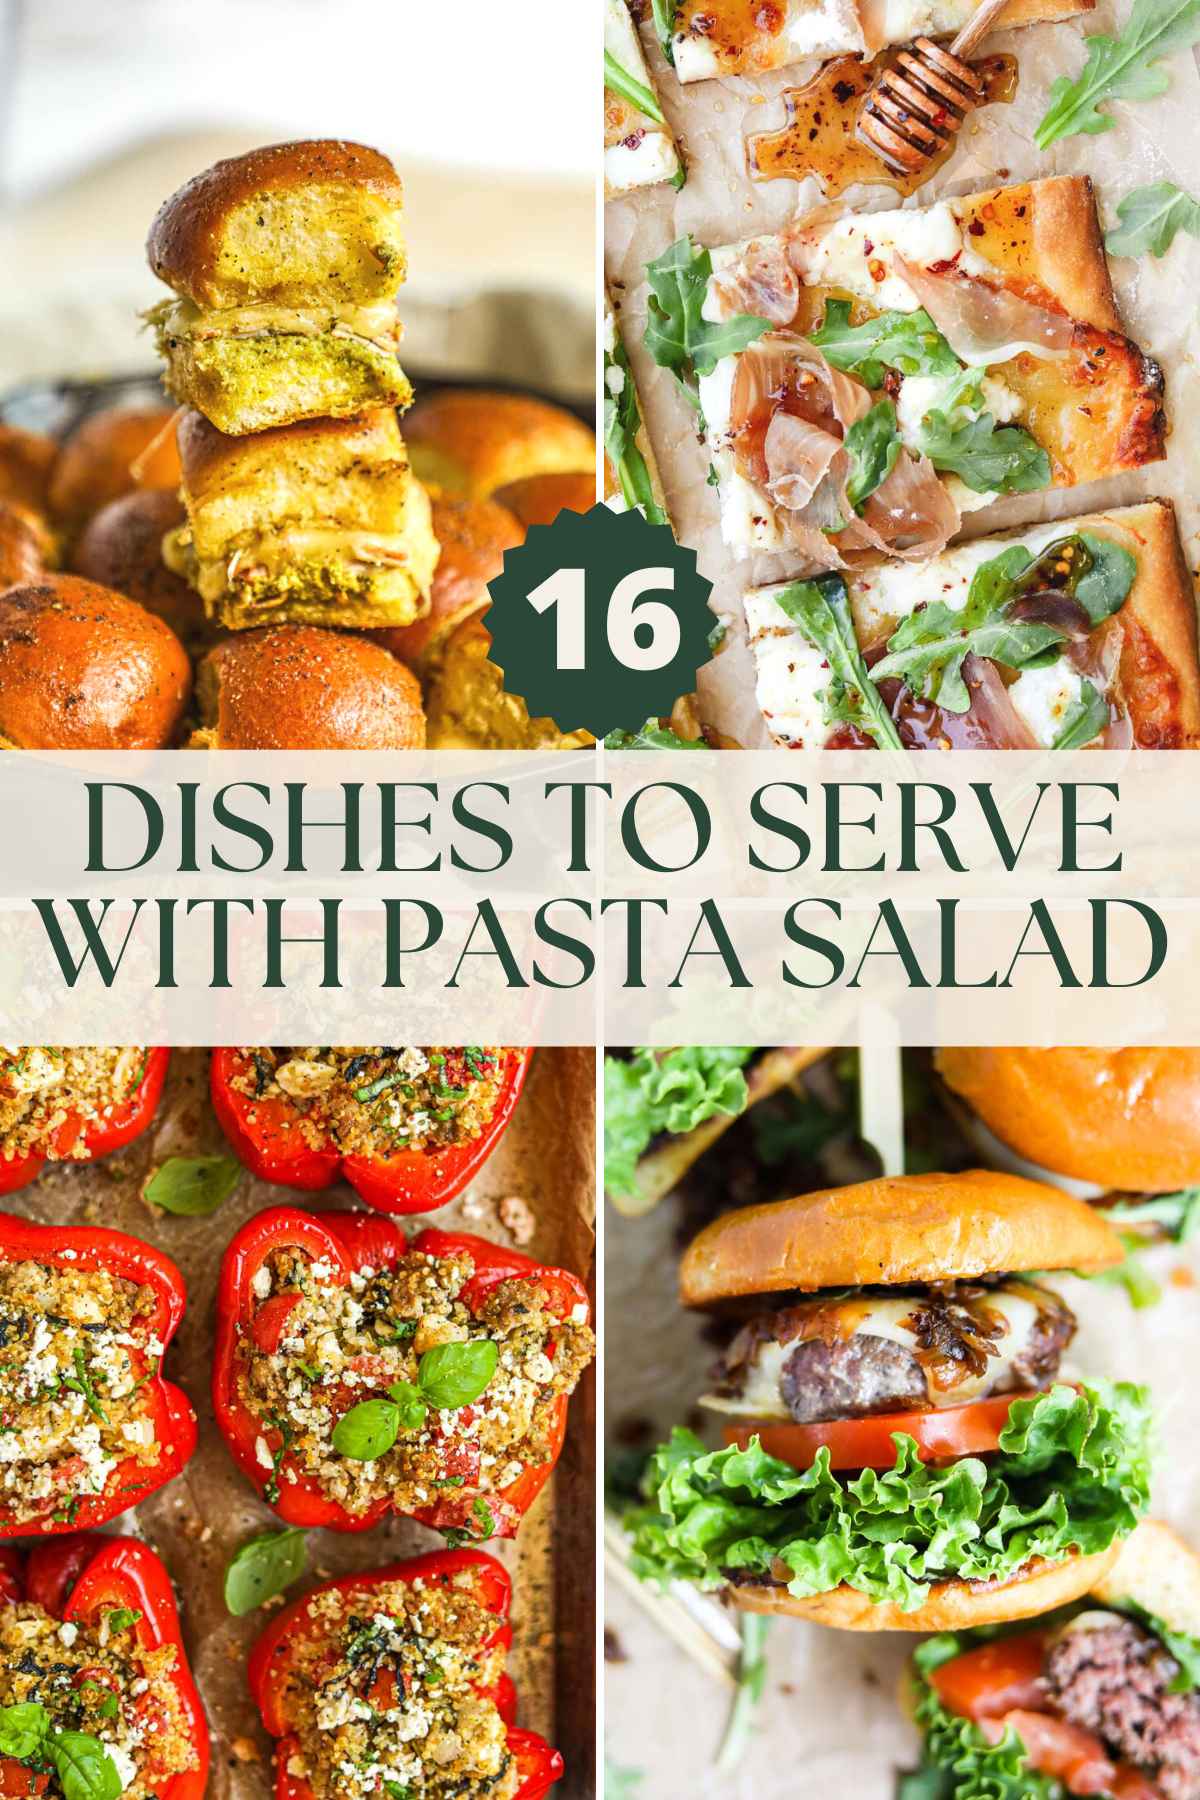 Dishes to serve with pasta salad including turkey pesto sliders, prosciutto arugula pizza, quinoa turkey peppers, and wagyu burger.